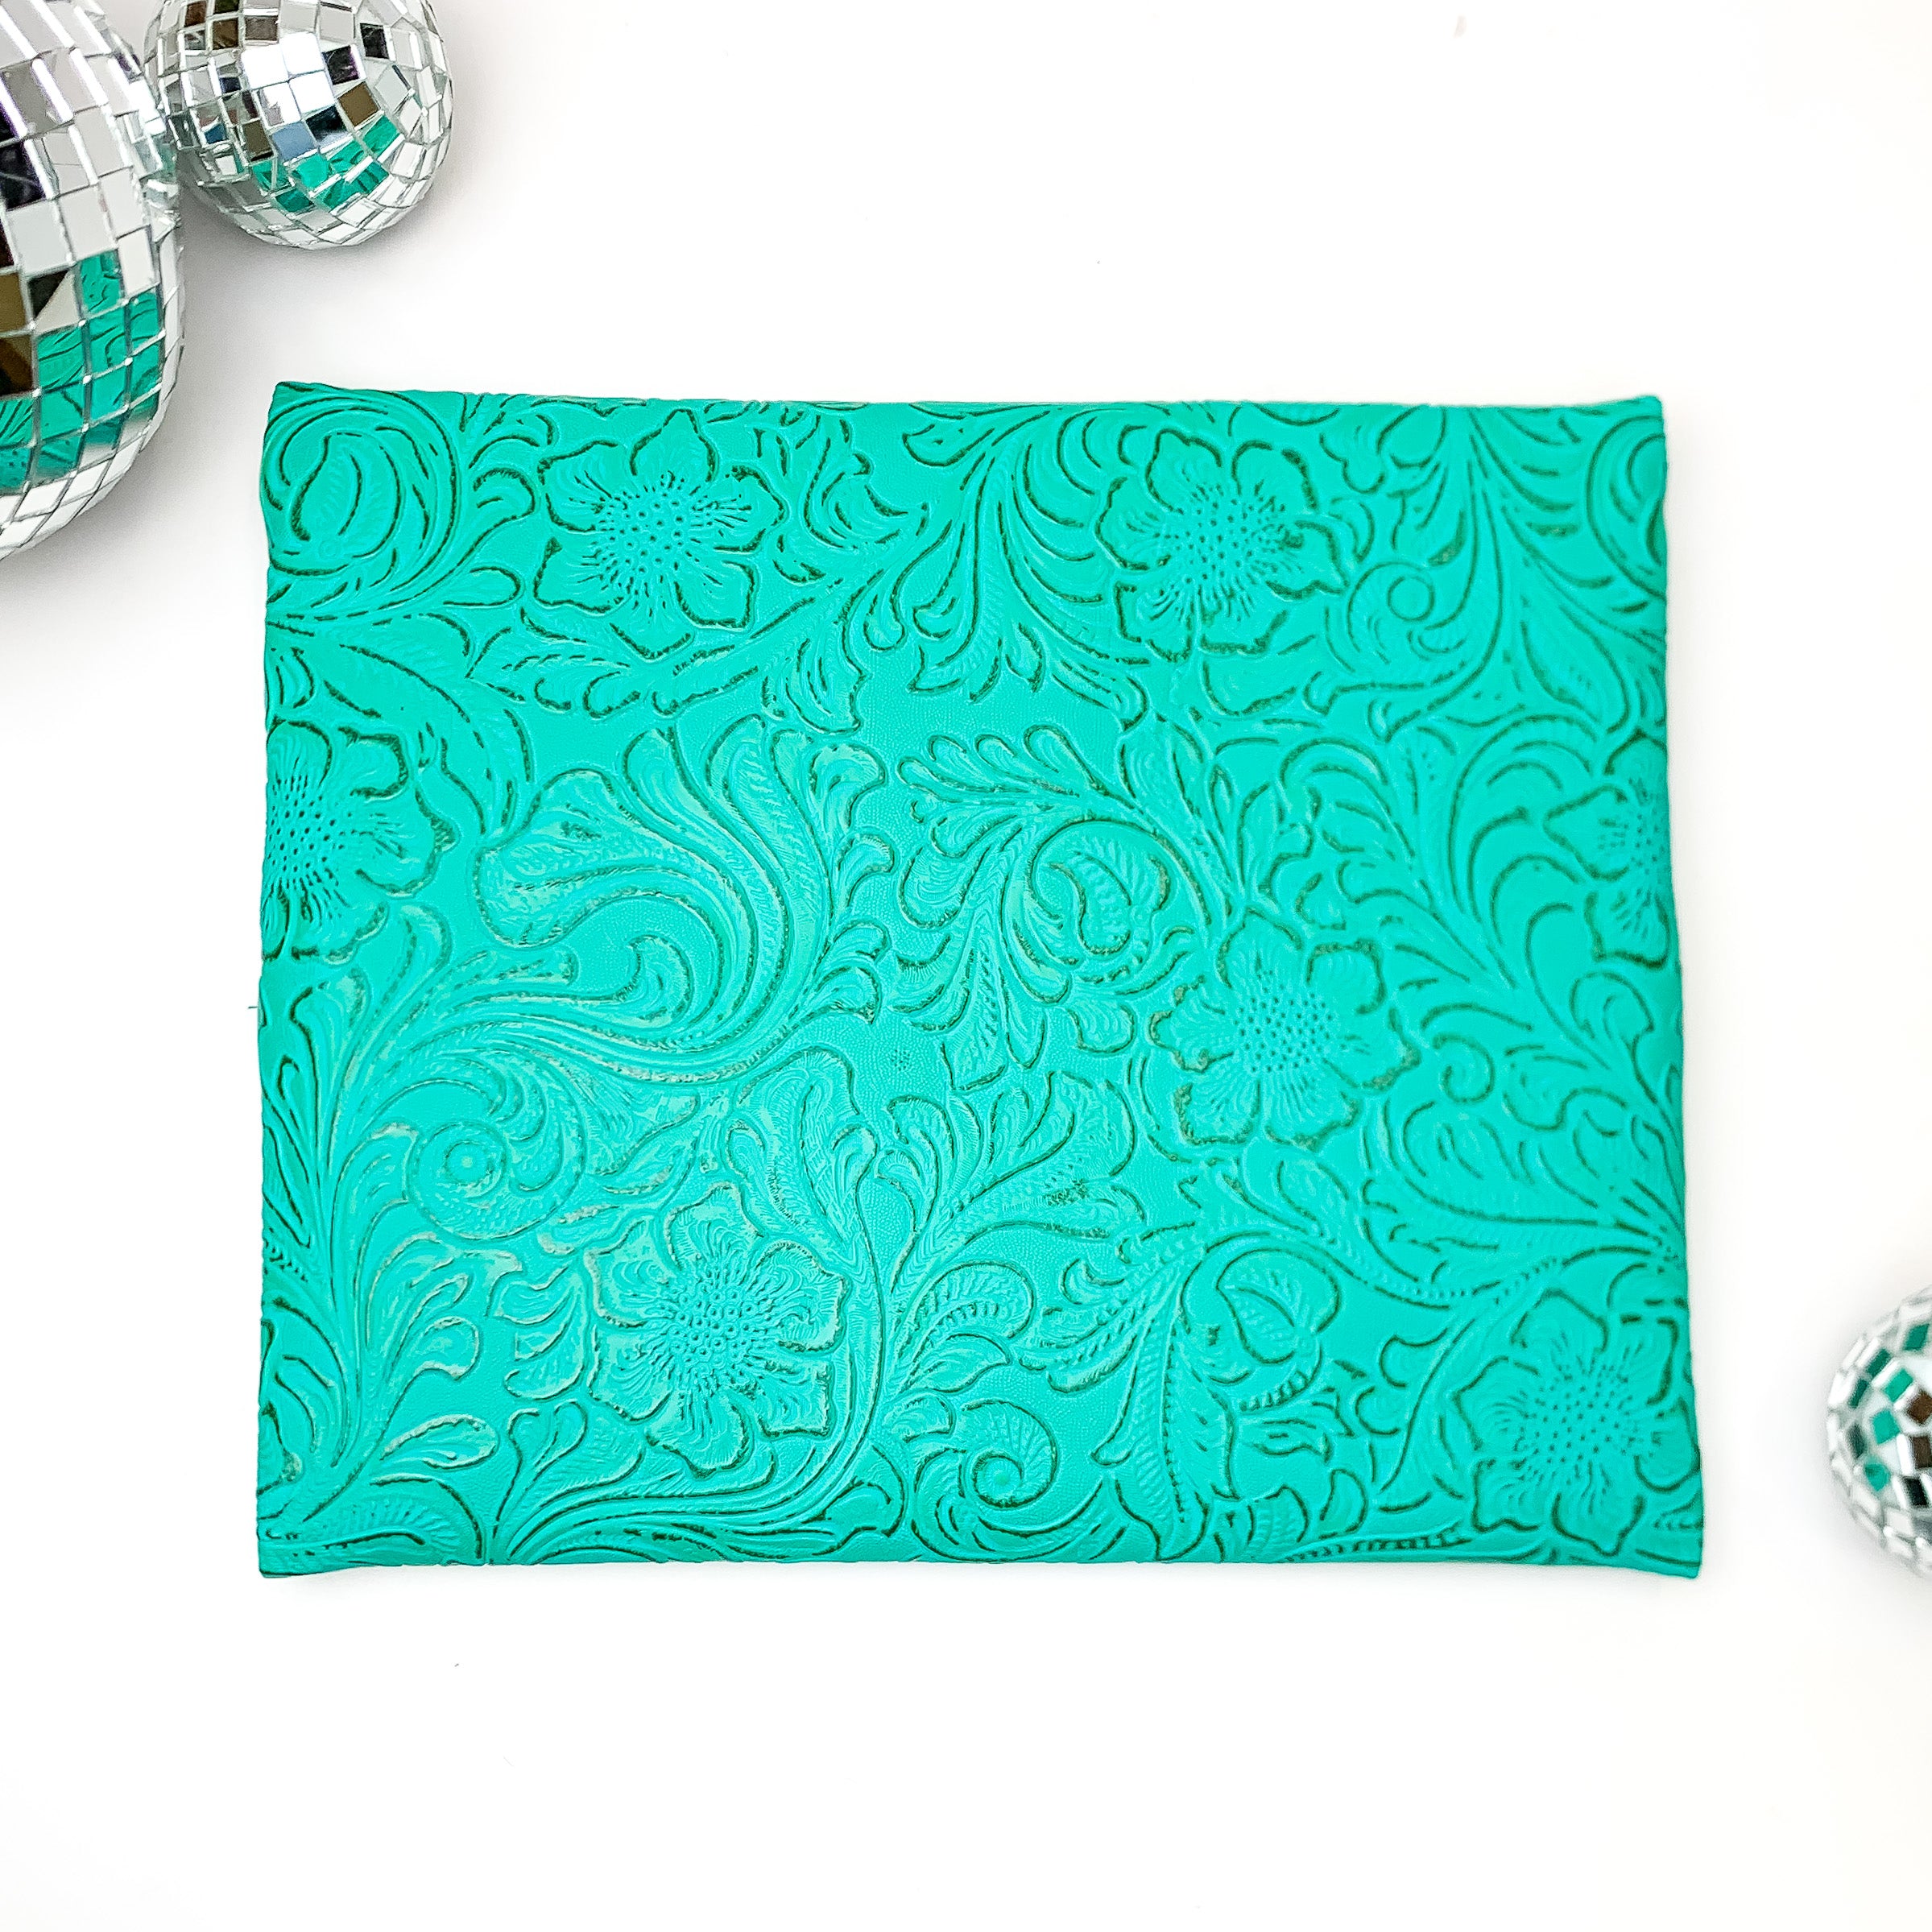 Makeup Junkie | Small Turquoise Dream Lay Flat Bag in Turquoise Green Tooled Print